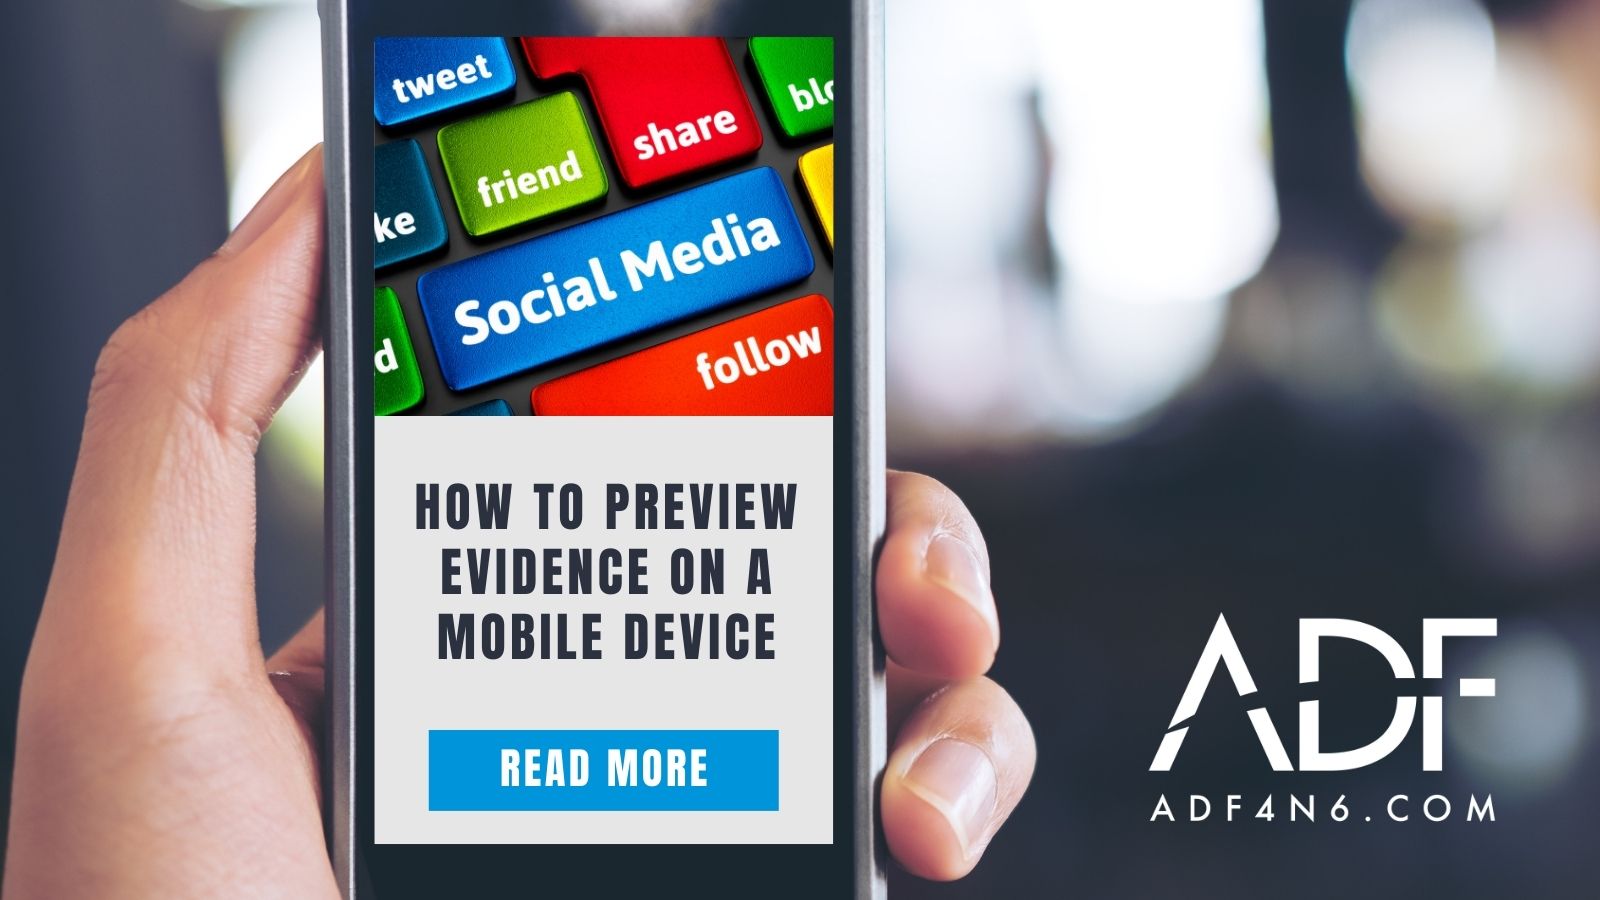 How to Preview Evidence on a Mobile Device